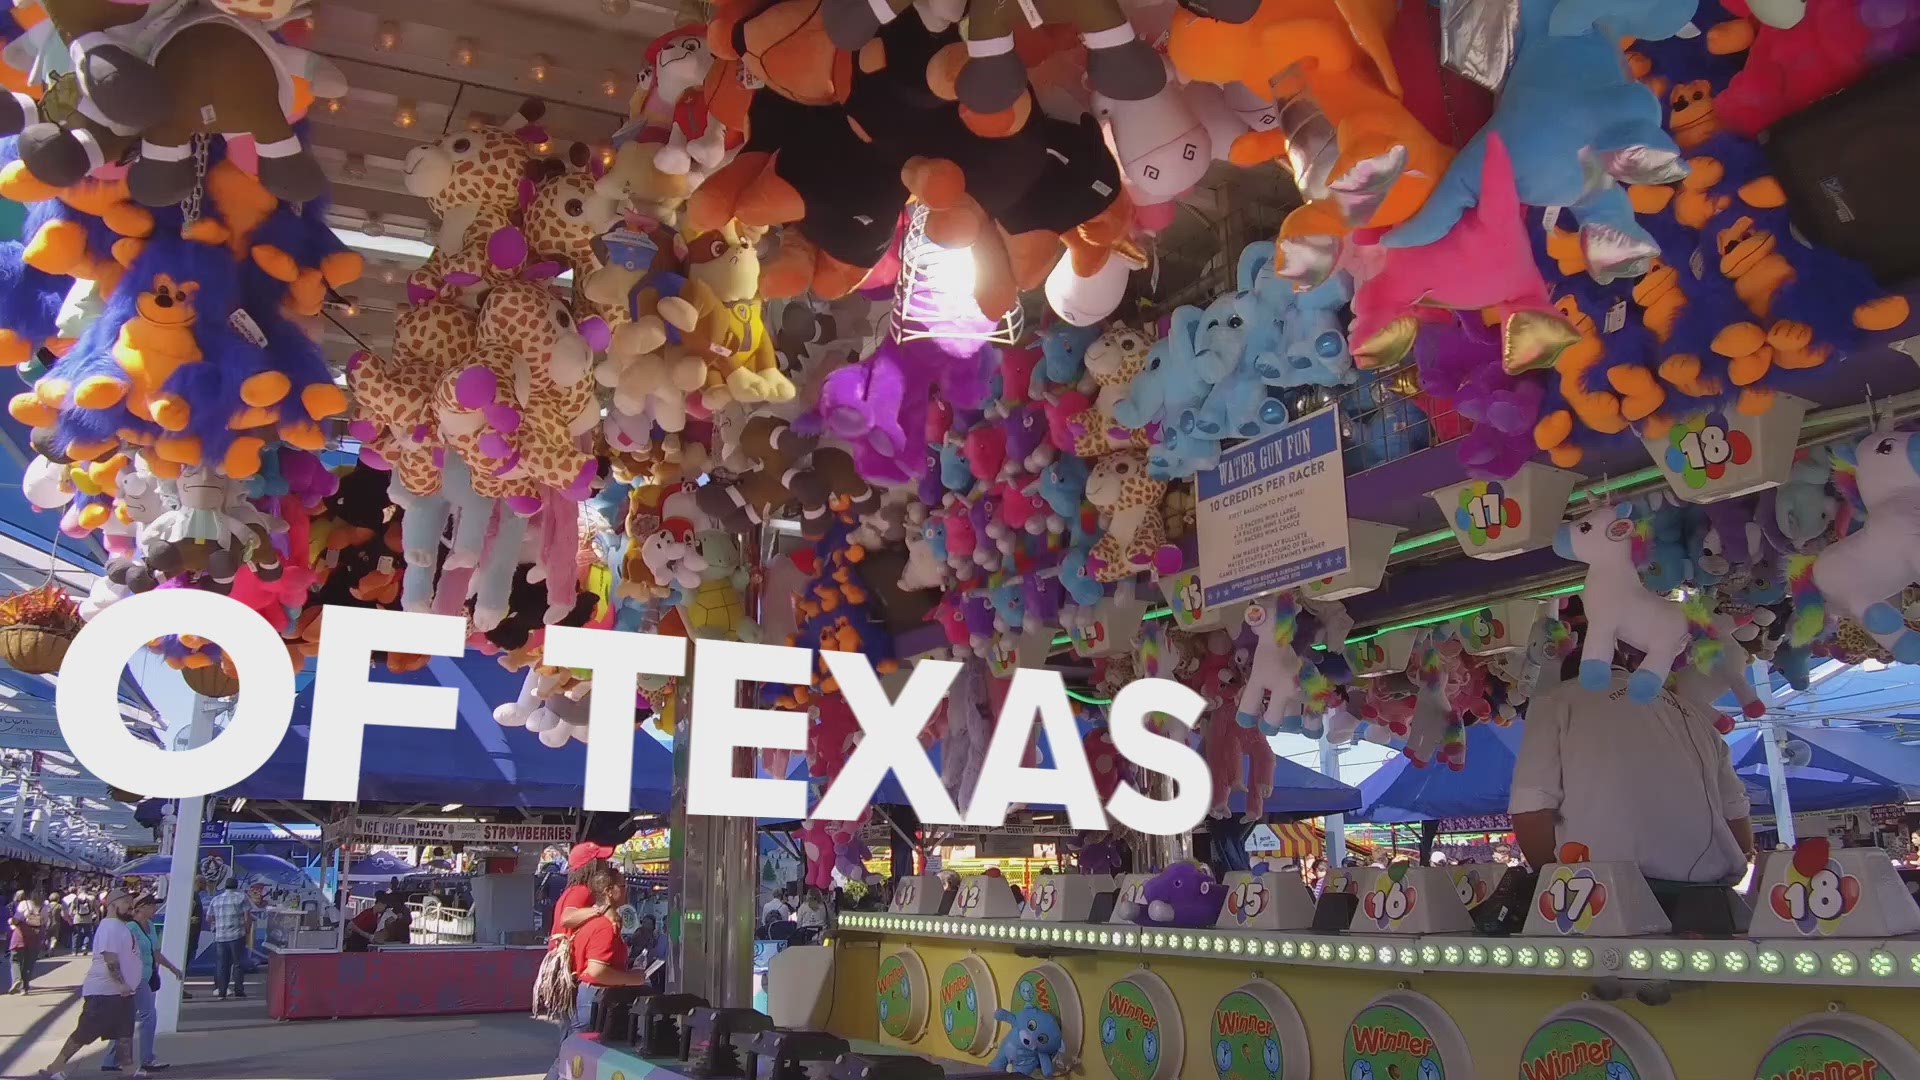 Here's a quick rundown of the top earning Midway games at the State Fair of Texas.